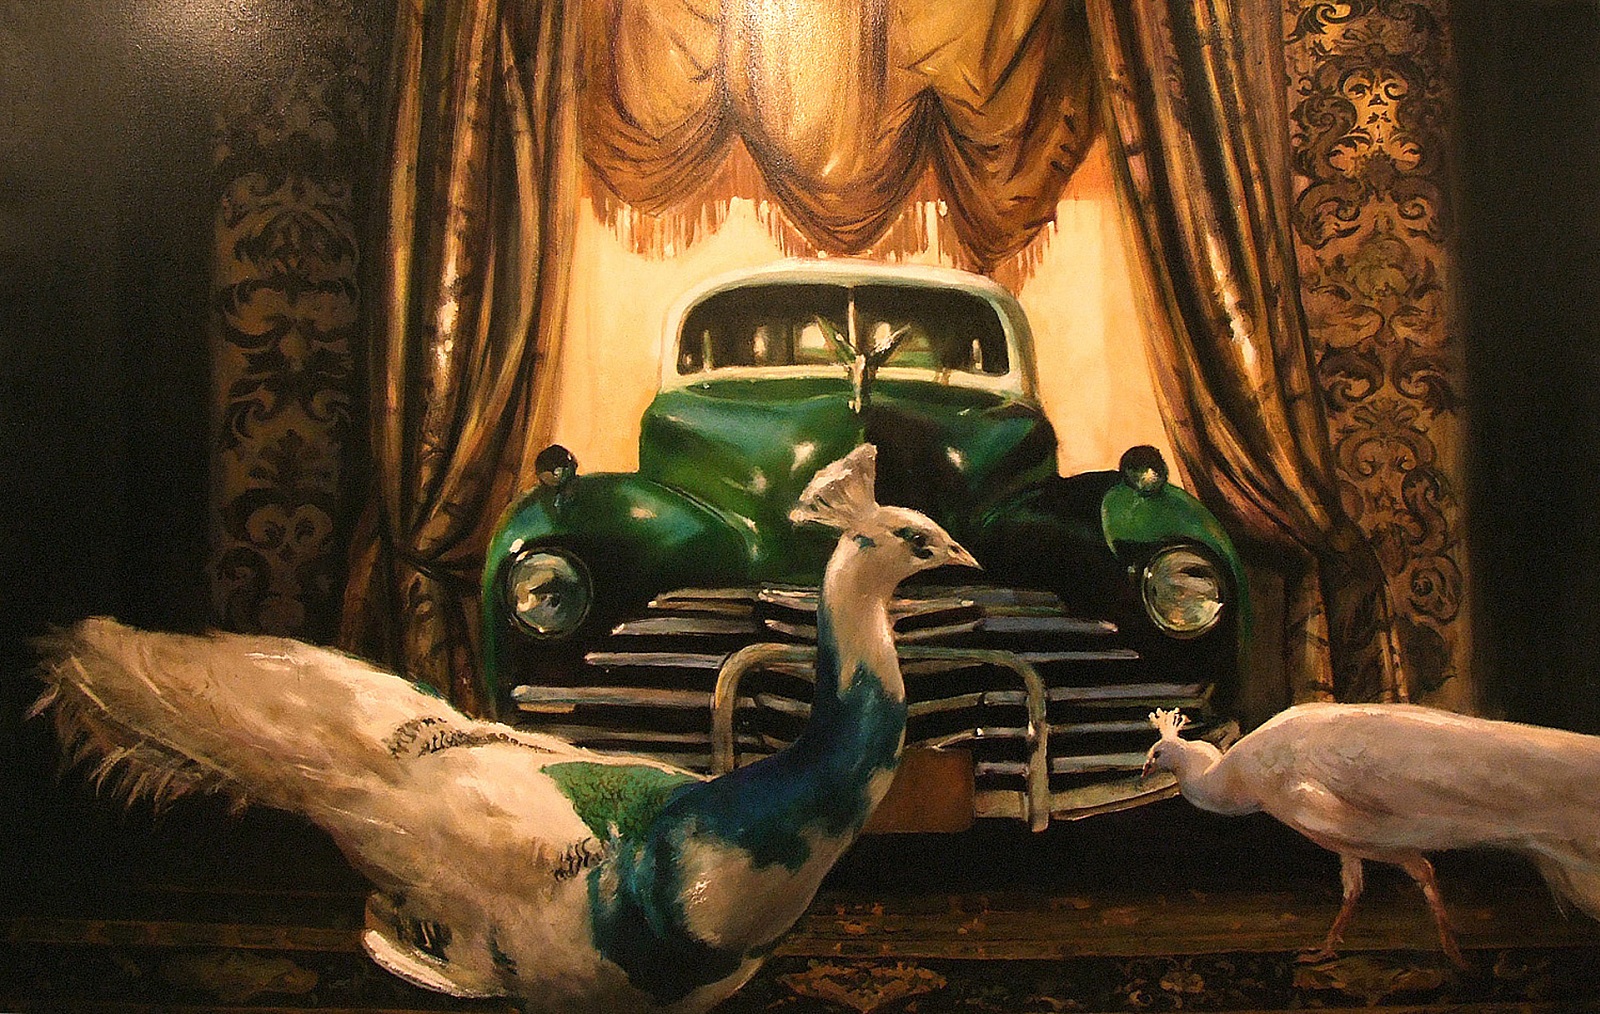 Green Cadillac - 2008, oil on canvas, 180 X 280 cm, private collection, RO - 13